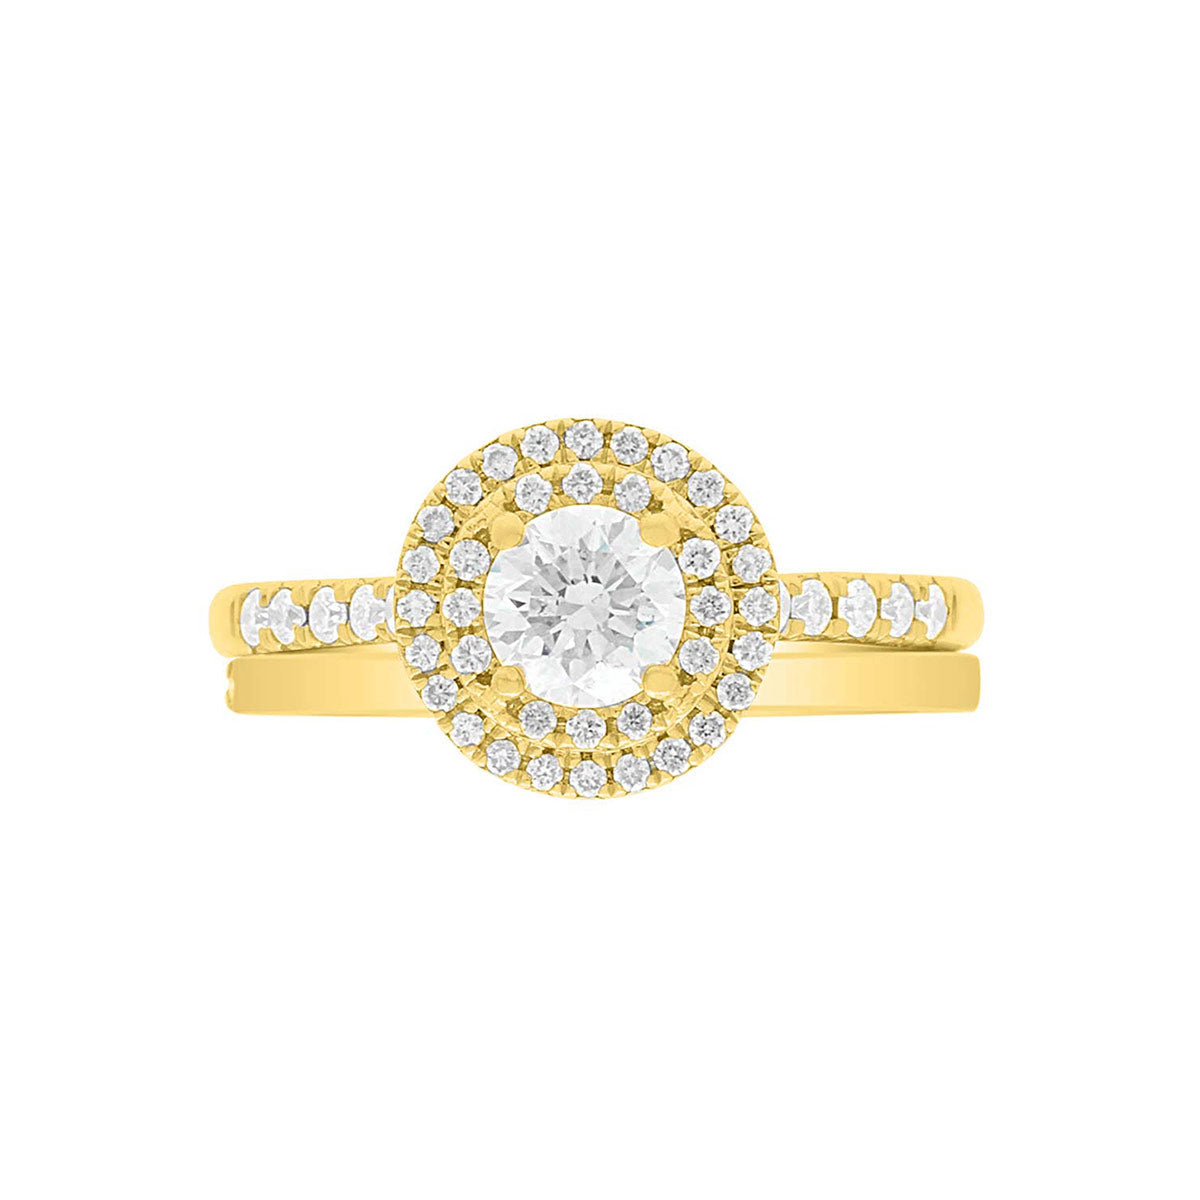 Round Double Halo Engagement Ring made of yellow gold and diamonds laying flat with a matching plain wedding ring